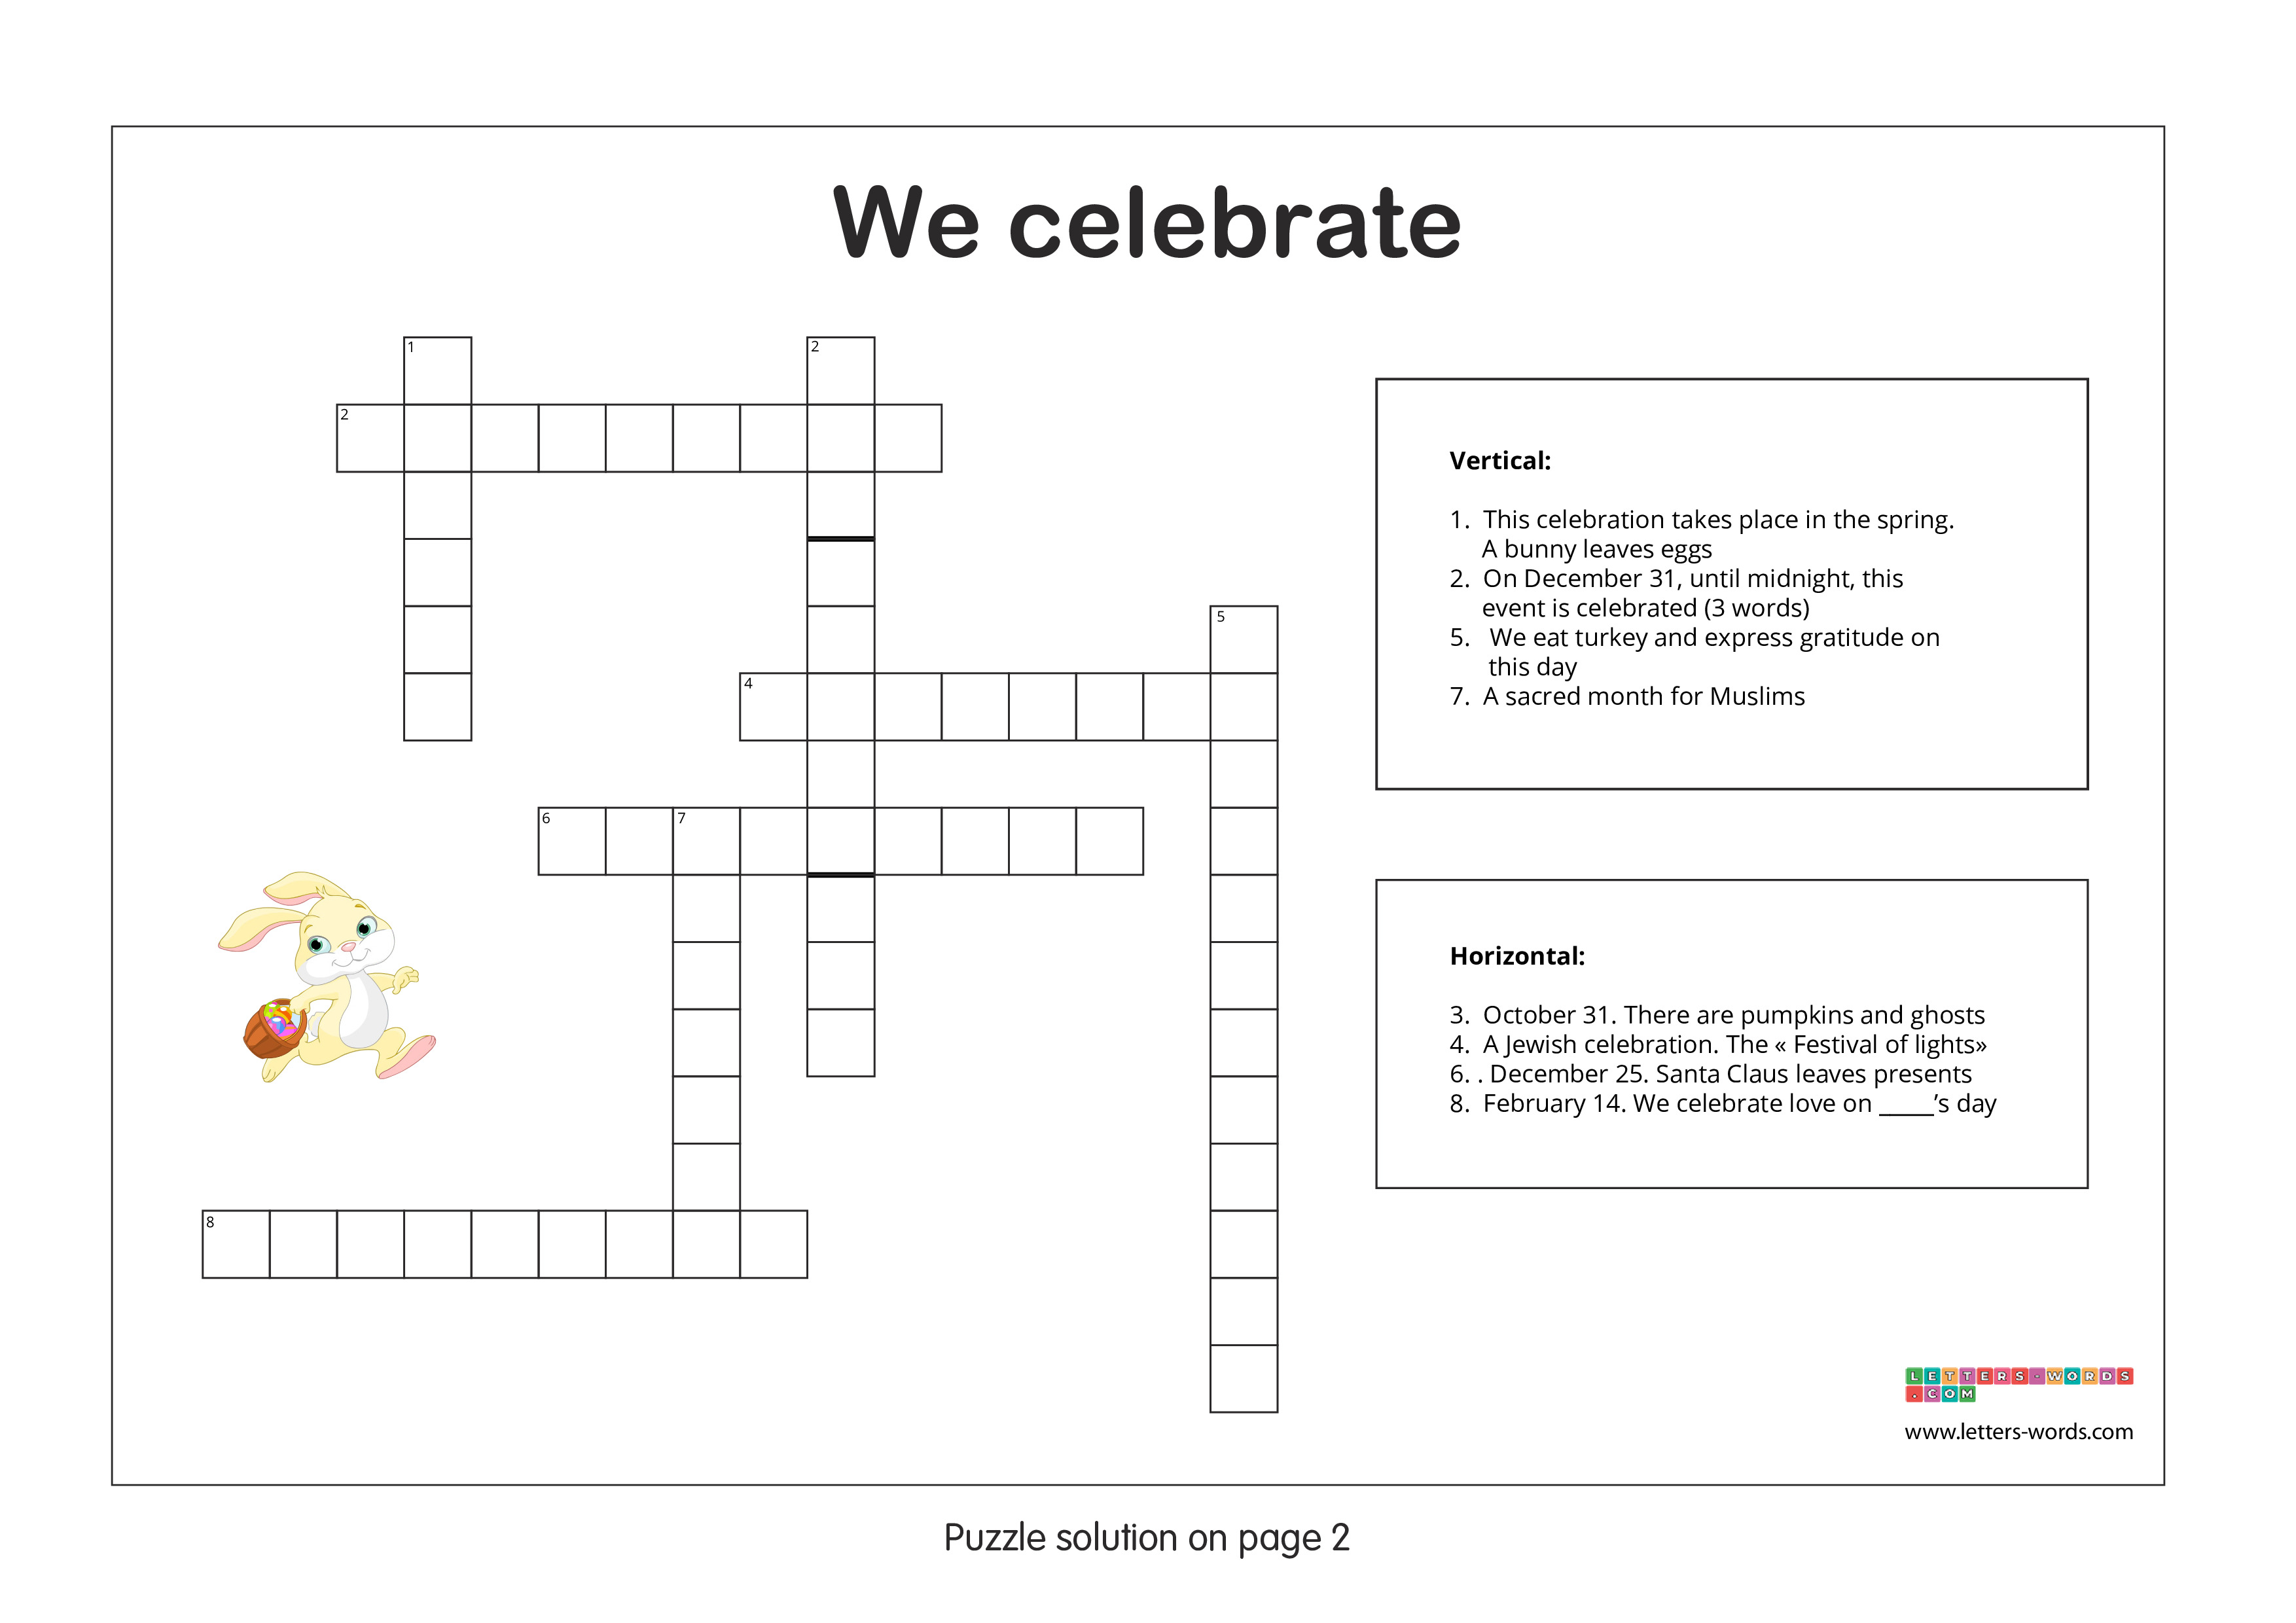 Crossword puzzles for children aged 10+ - We celebrate